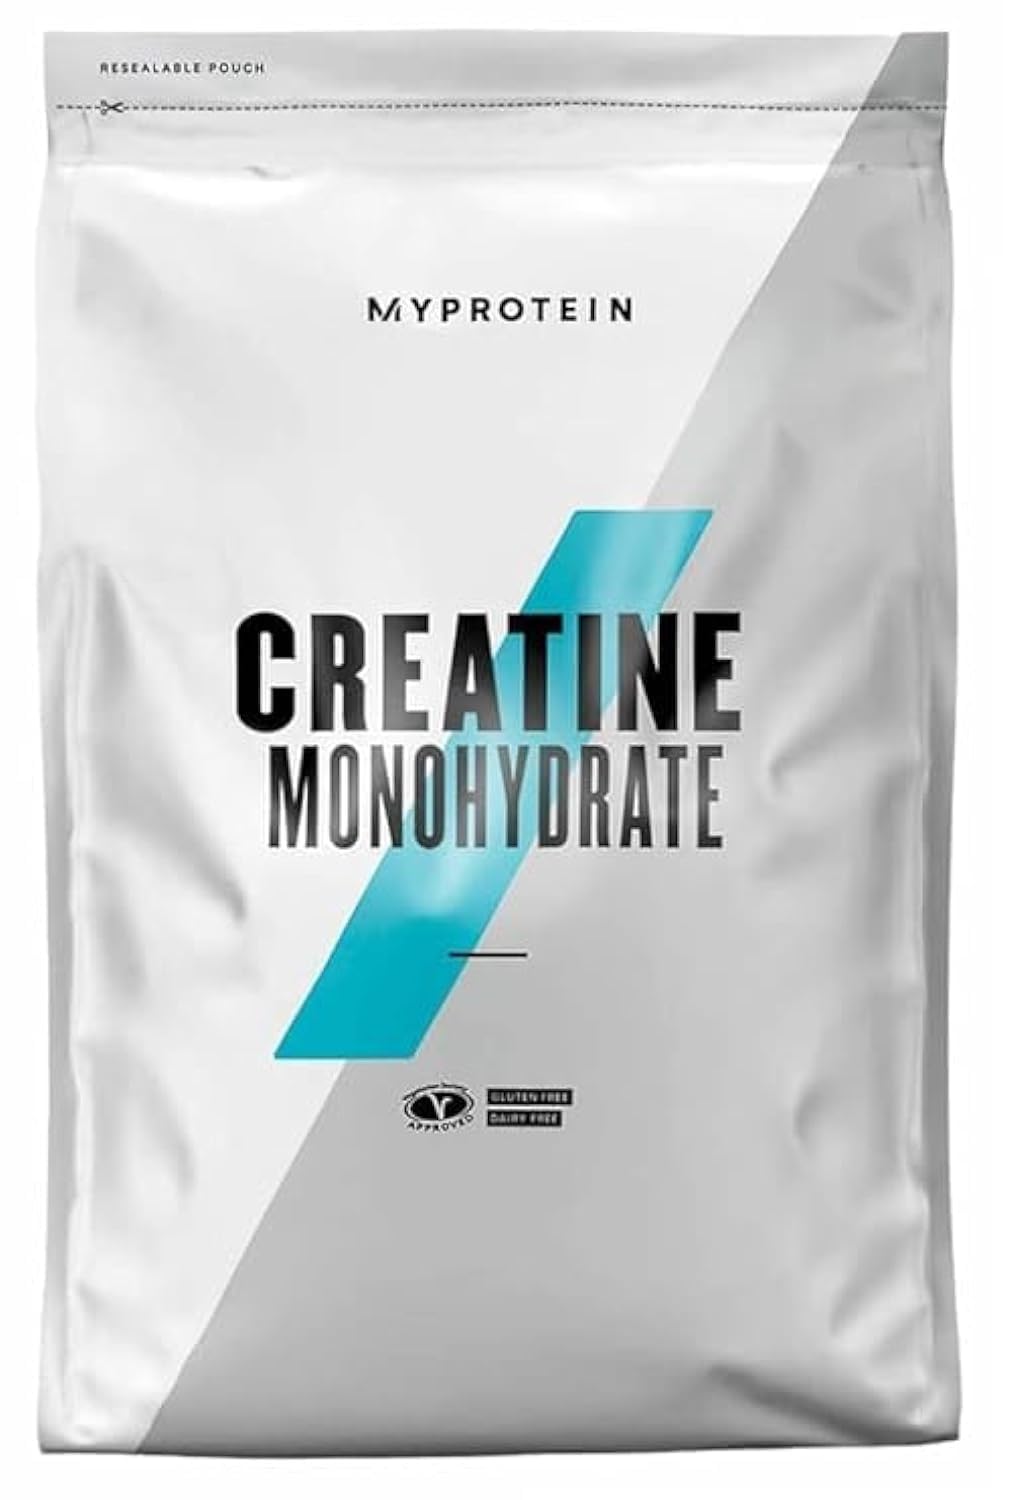 Myprotein - Unflavored creatine Monohydrate 055 lbs - PostPre Workout Supplement Powder for All Sports and Exercises - gluten Fr